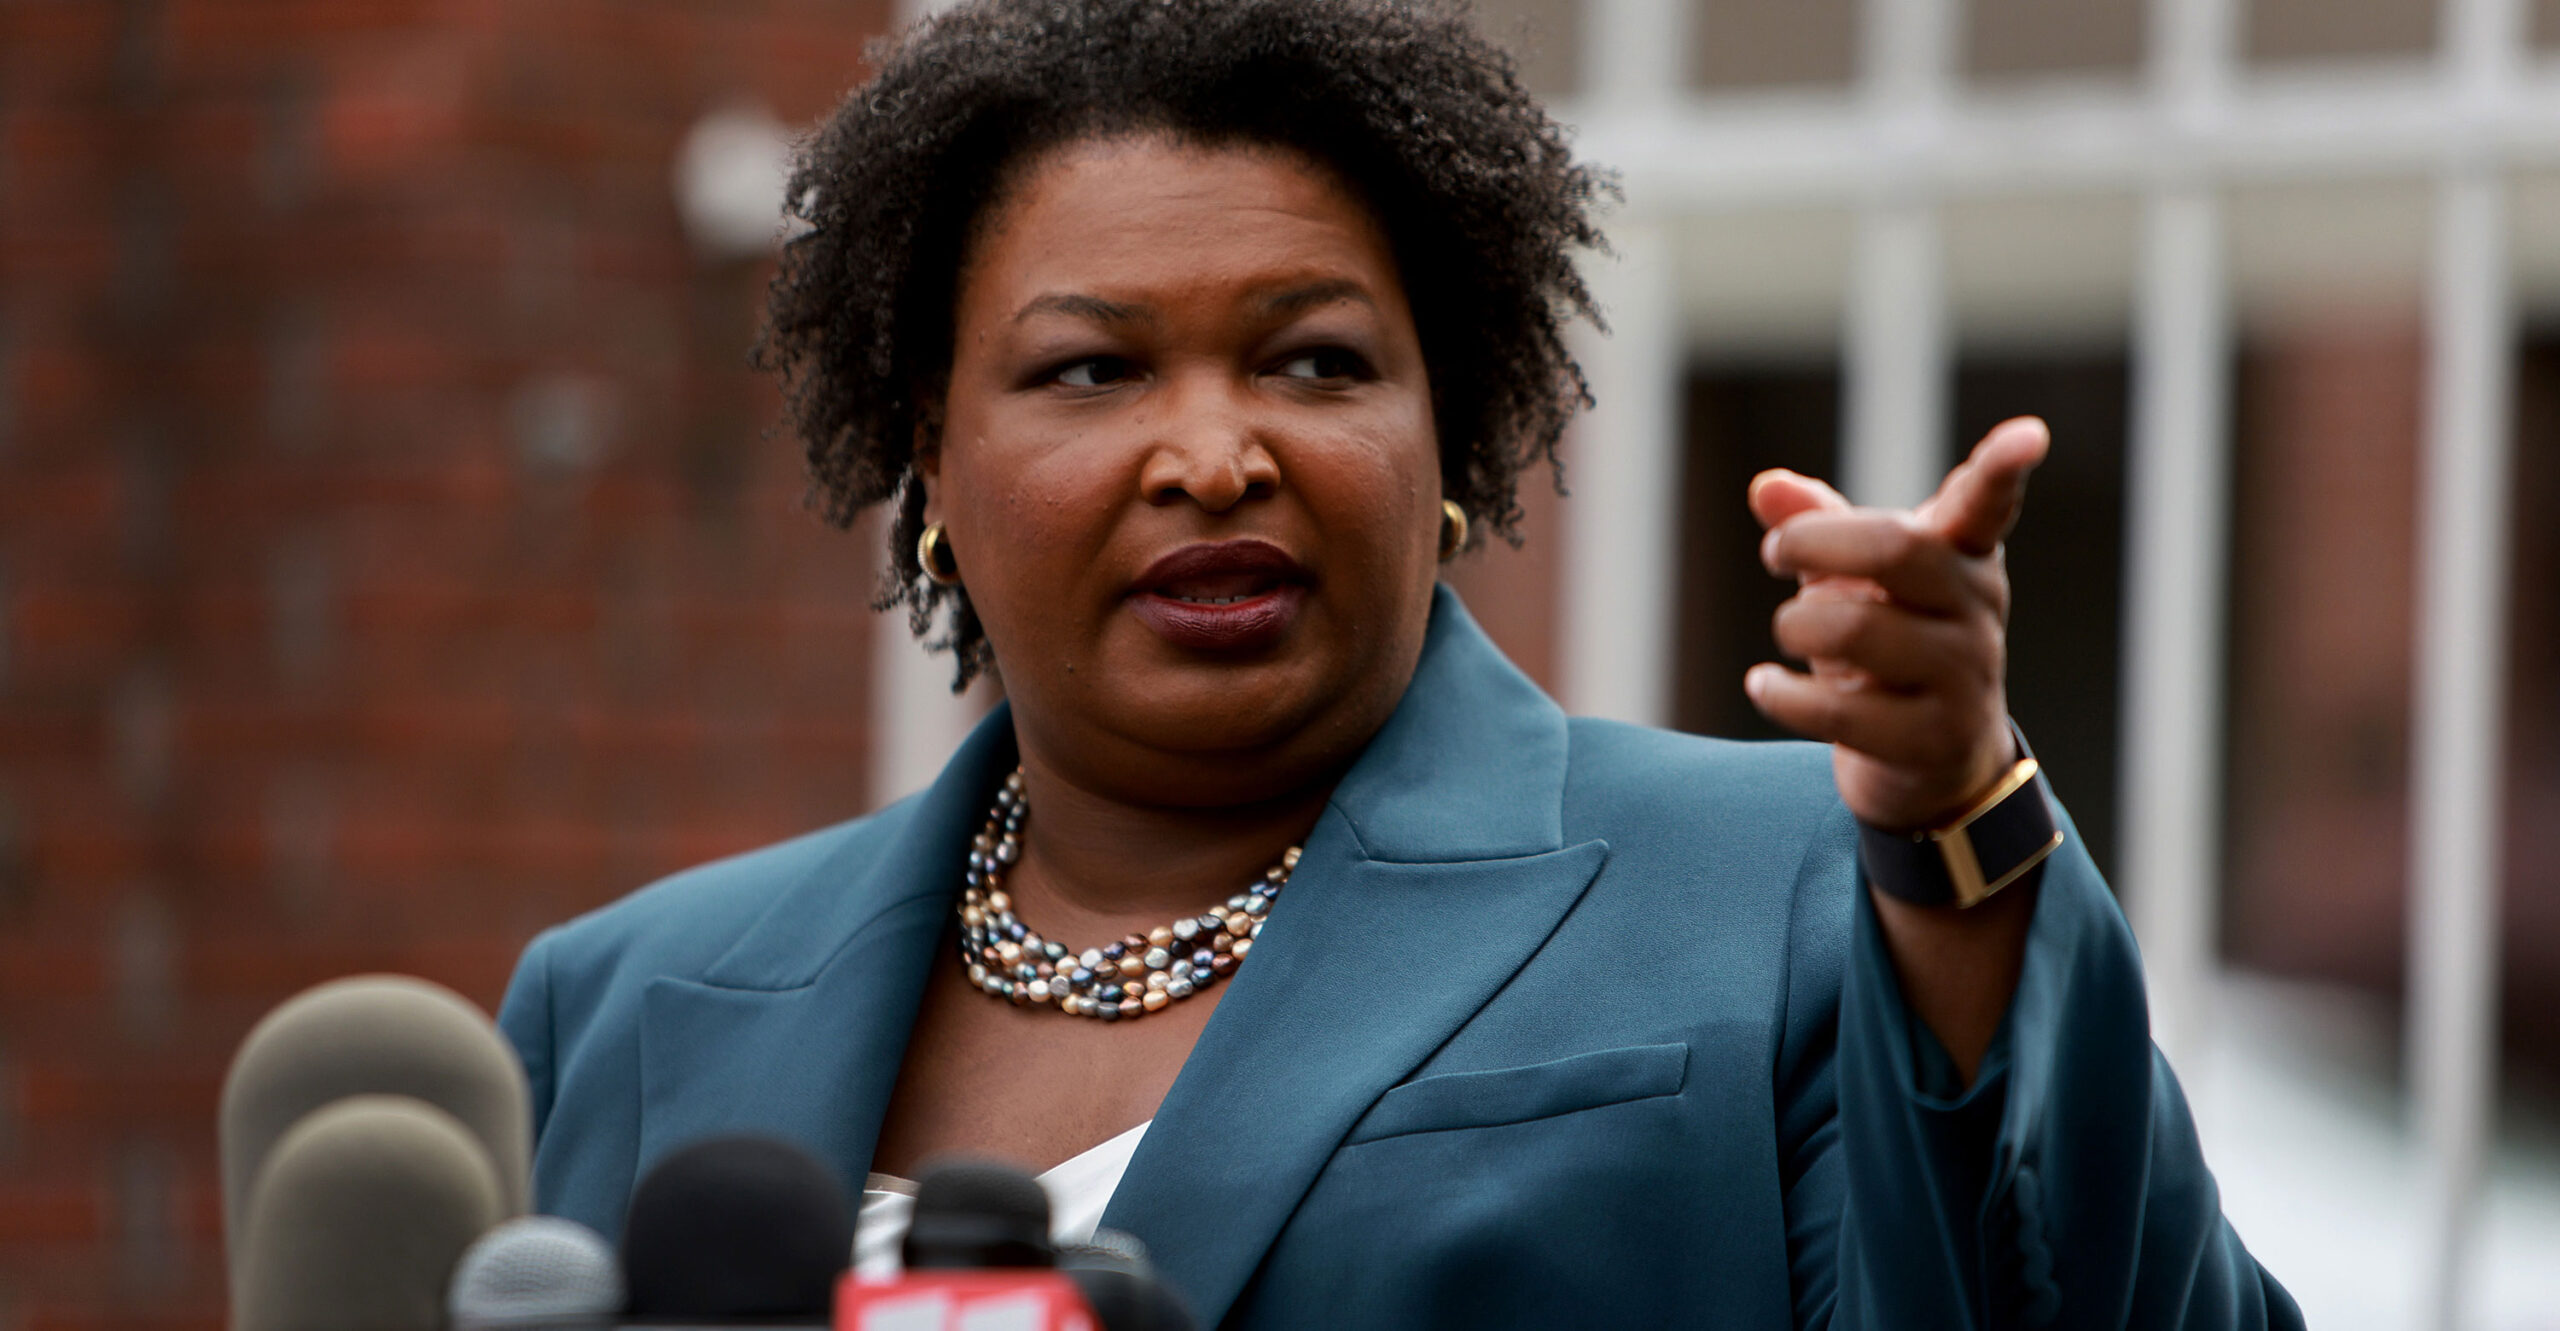 ICYMI: Fact Check: 'There Is No Such Thing as a Heartbeat at 6 Weeks,' Says Stacey Abrams